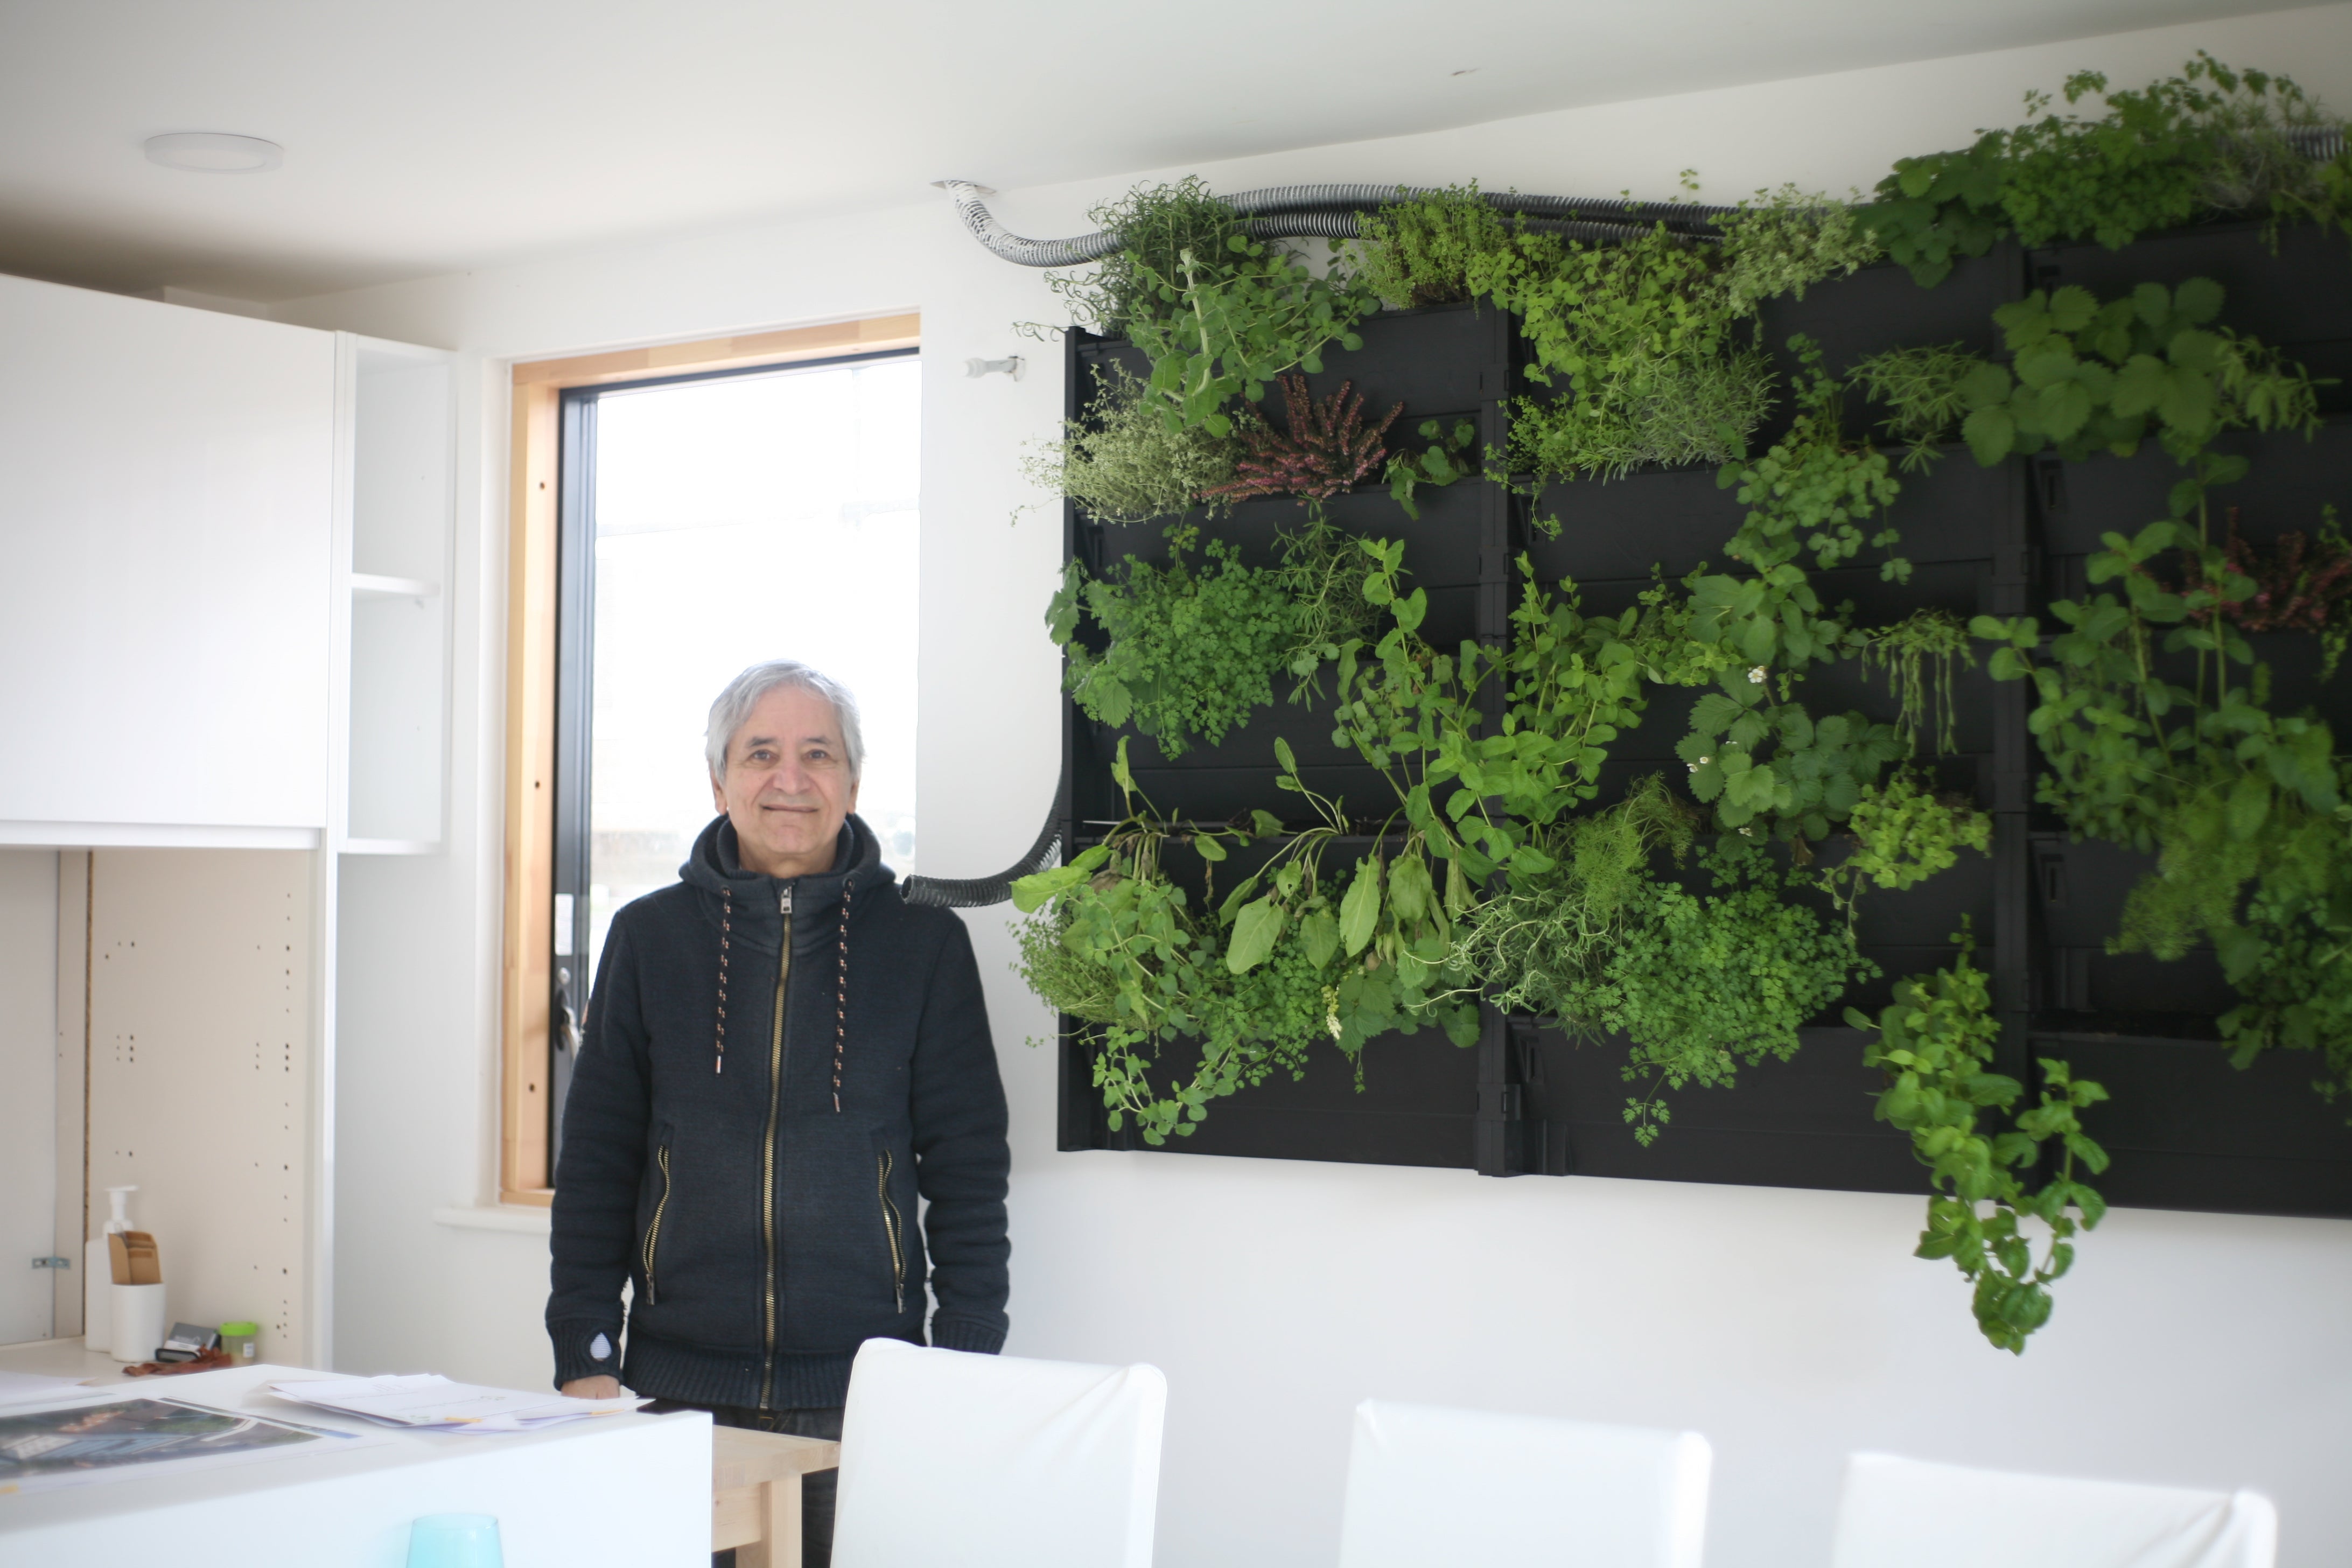 ‘This is my trial run,’ the 71-year-old beams in the front room of a completed show flat